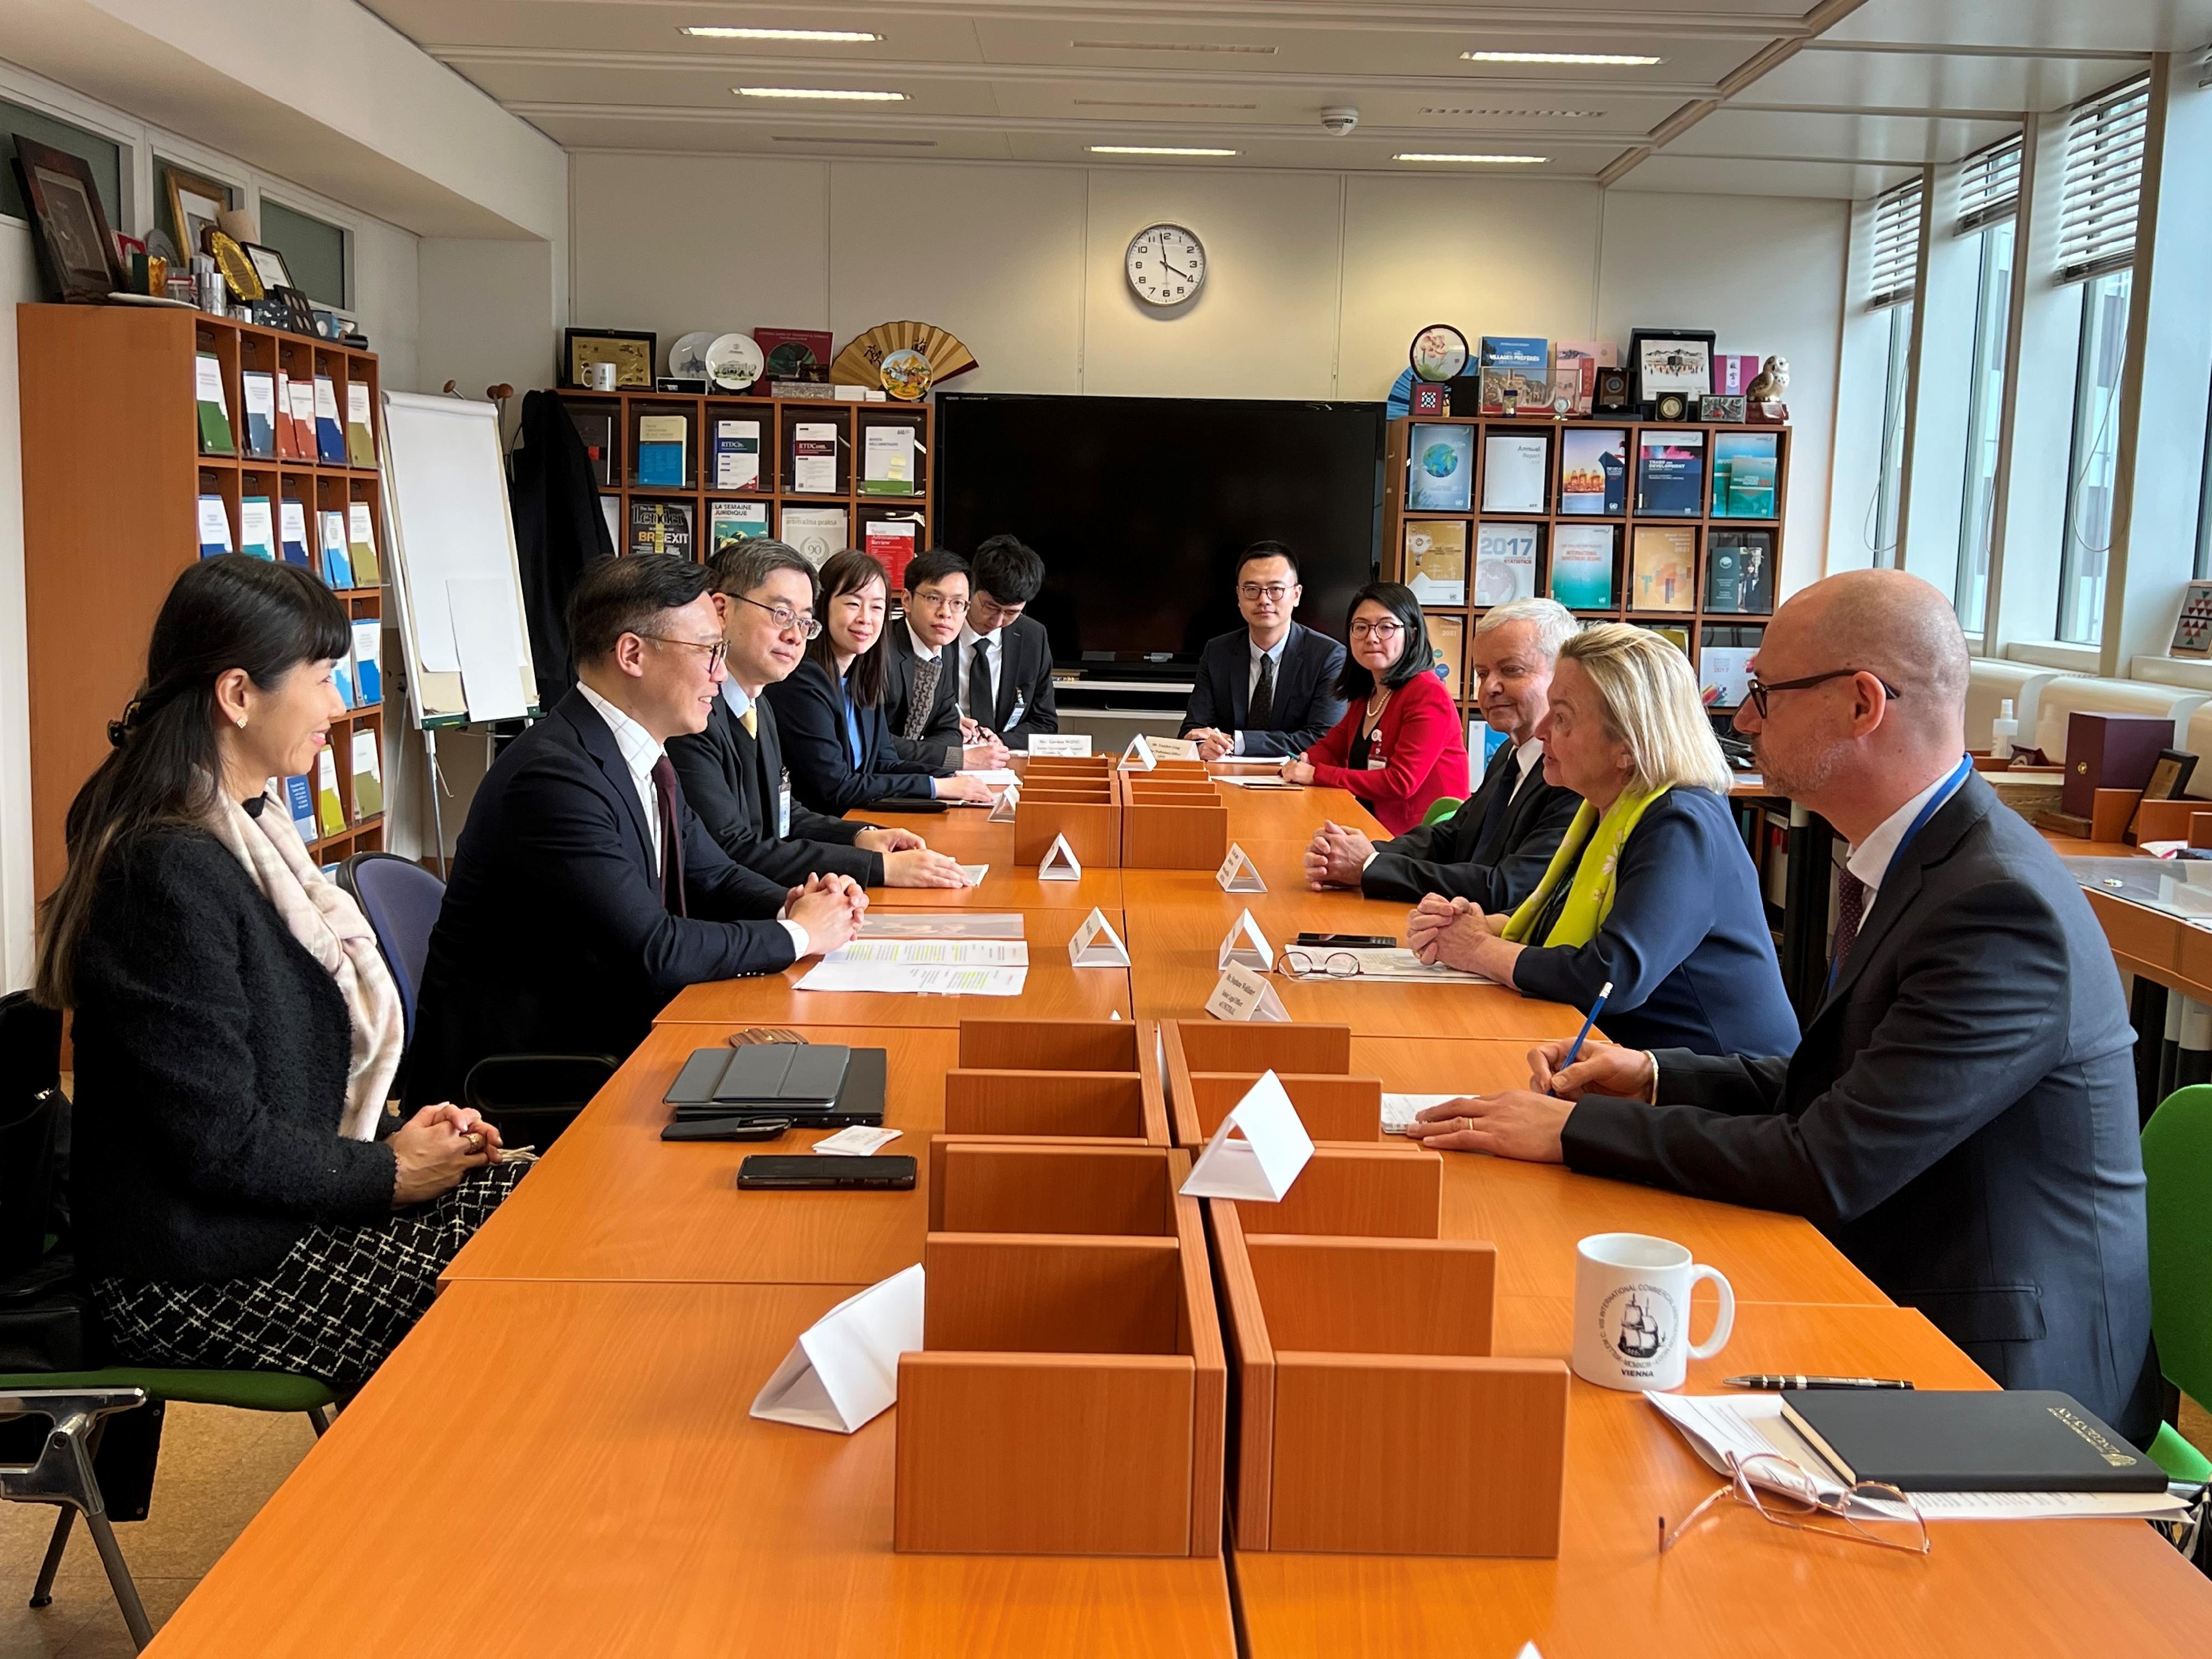 The Deputy Secretary for Justice, Mr Cheung Kwok-kwan (second left), met with the Secretary of the United Nations Commission on International Trade Law (UNCITRAL), Ms Anna Joubin-Bret (second right), and UNCITRAL's senior officers in Vienna, Austria, on March 7 (Vienna time) to discuss further collaboration between the two sides.
